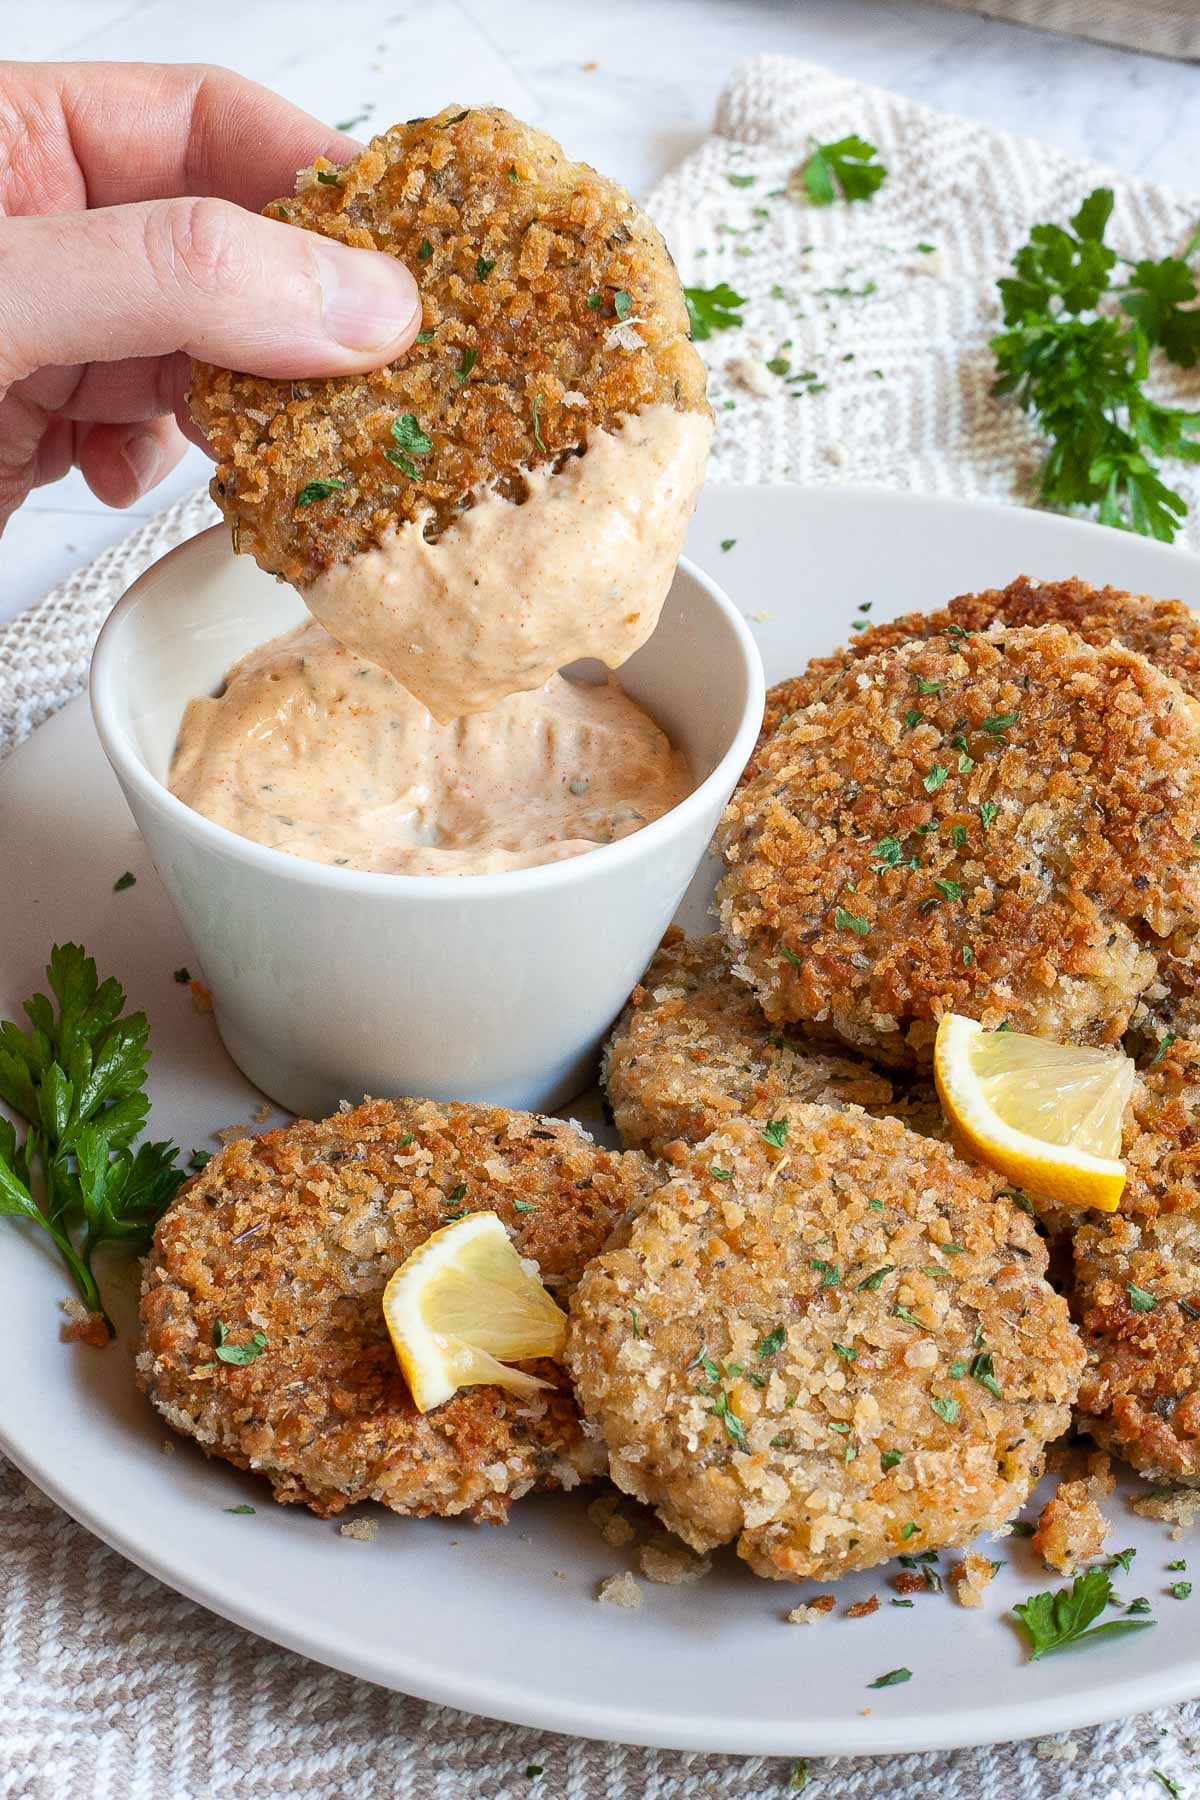 Several round-shaped breadcrumbs covered patties on a large white plate with a light orange sauce in a white bowl. Chopped parsley and lemon wedges are around for decoration. A hand is dipping one in the sauce.